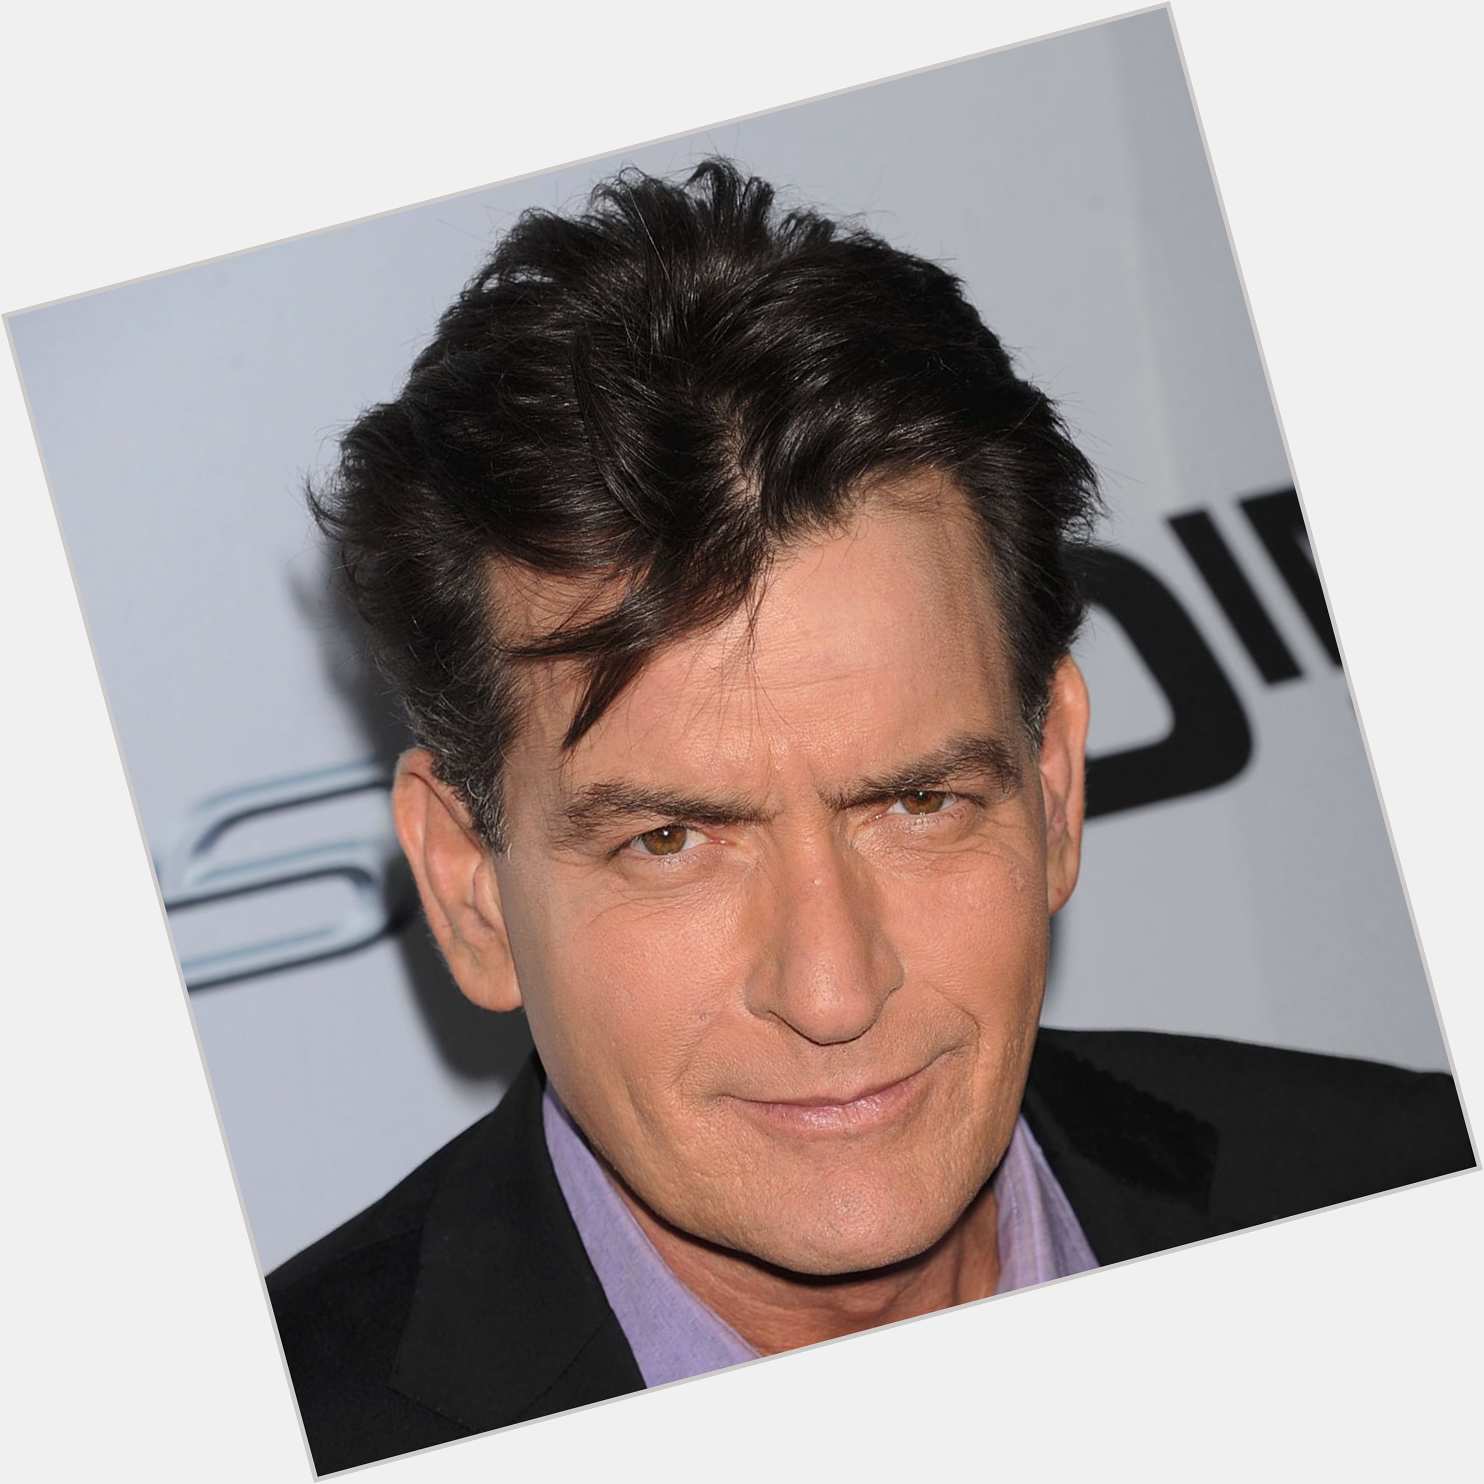 Happy related 57th birthday to (Charlie Sheen) who was celebrate from yesterday! 